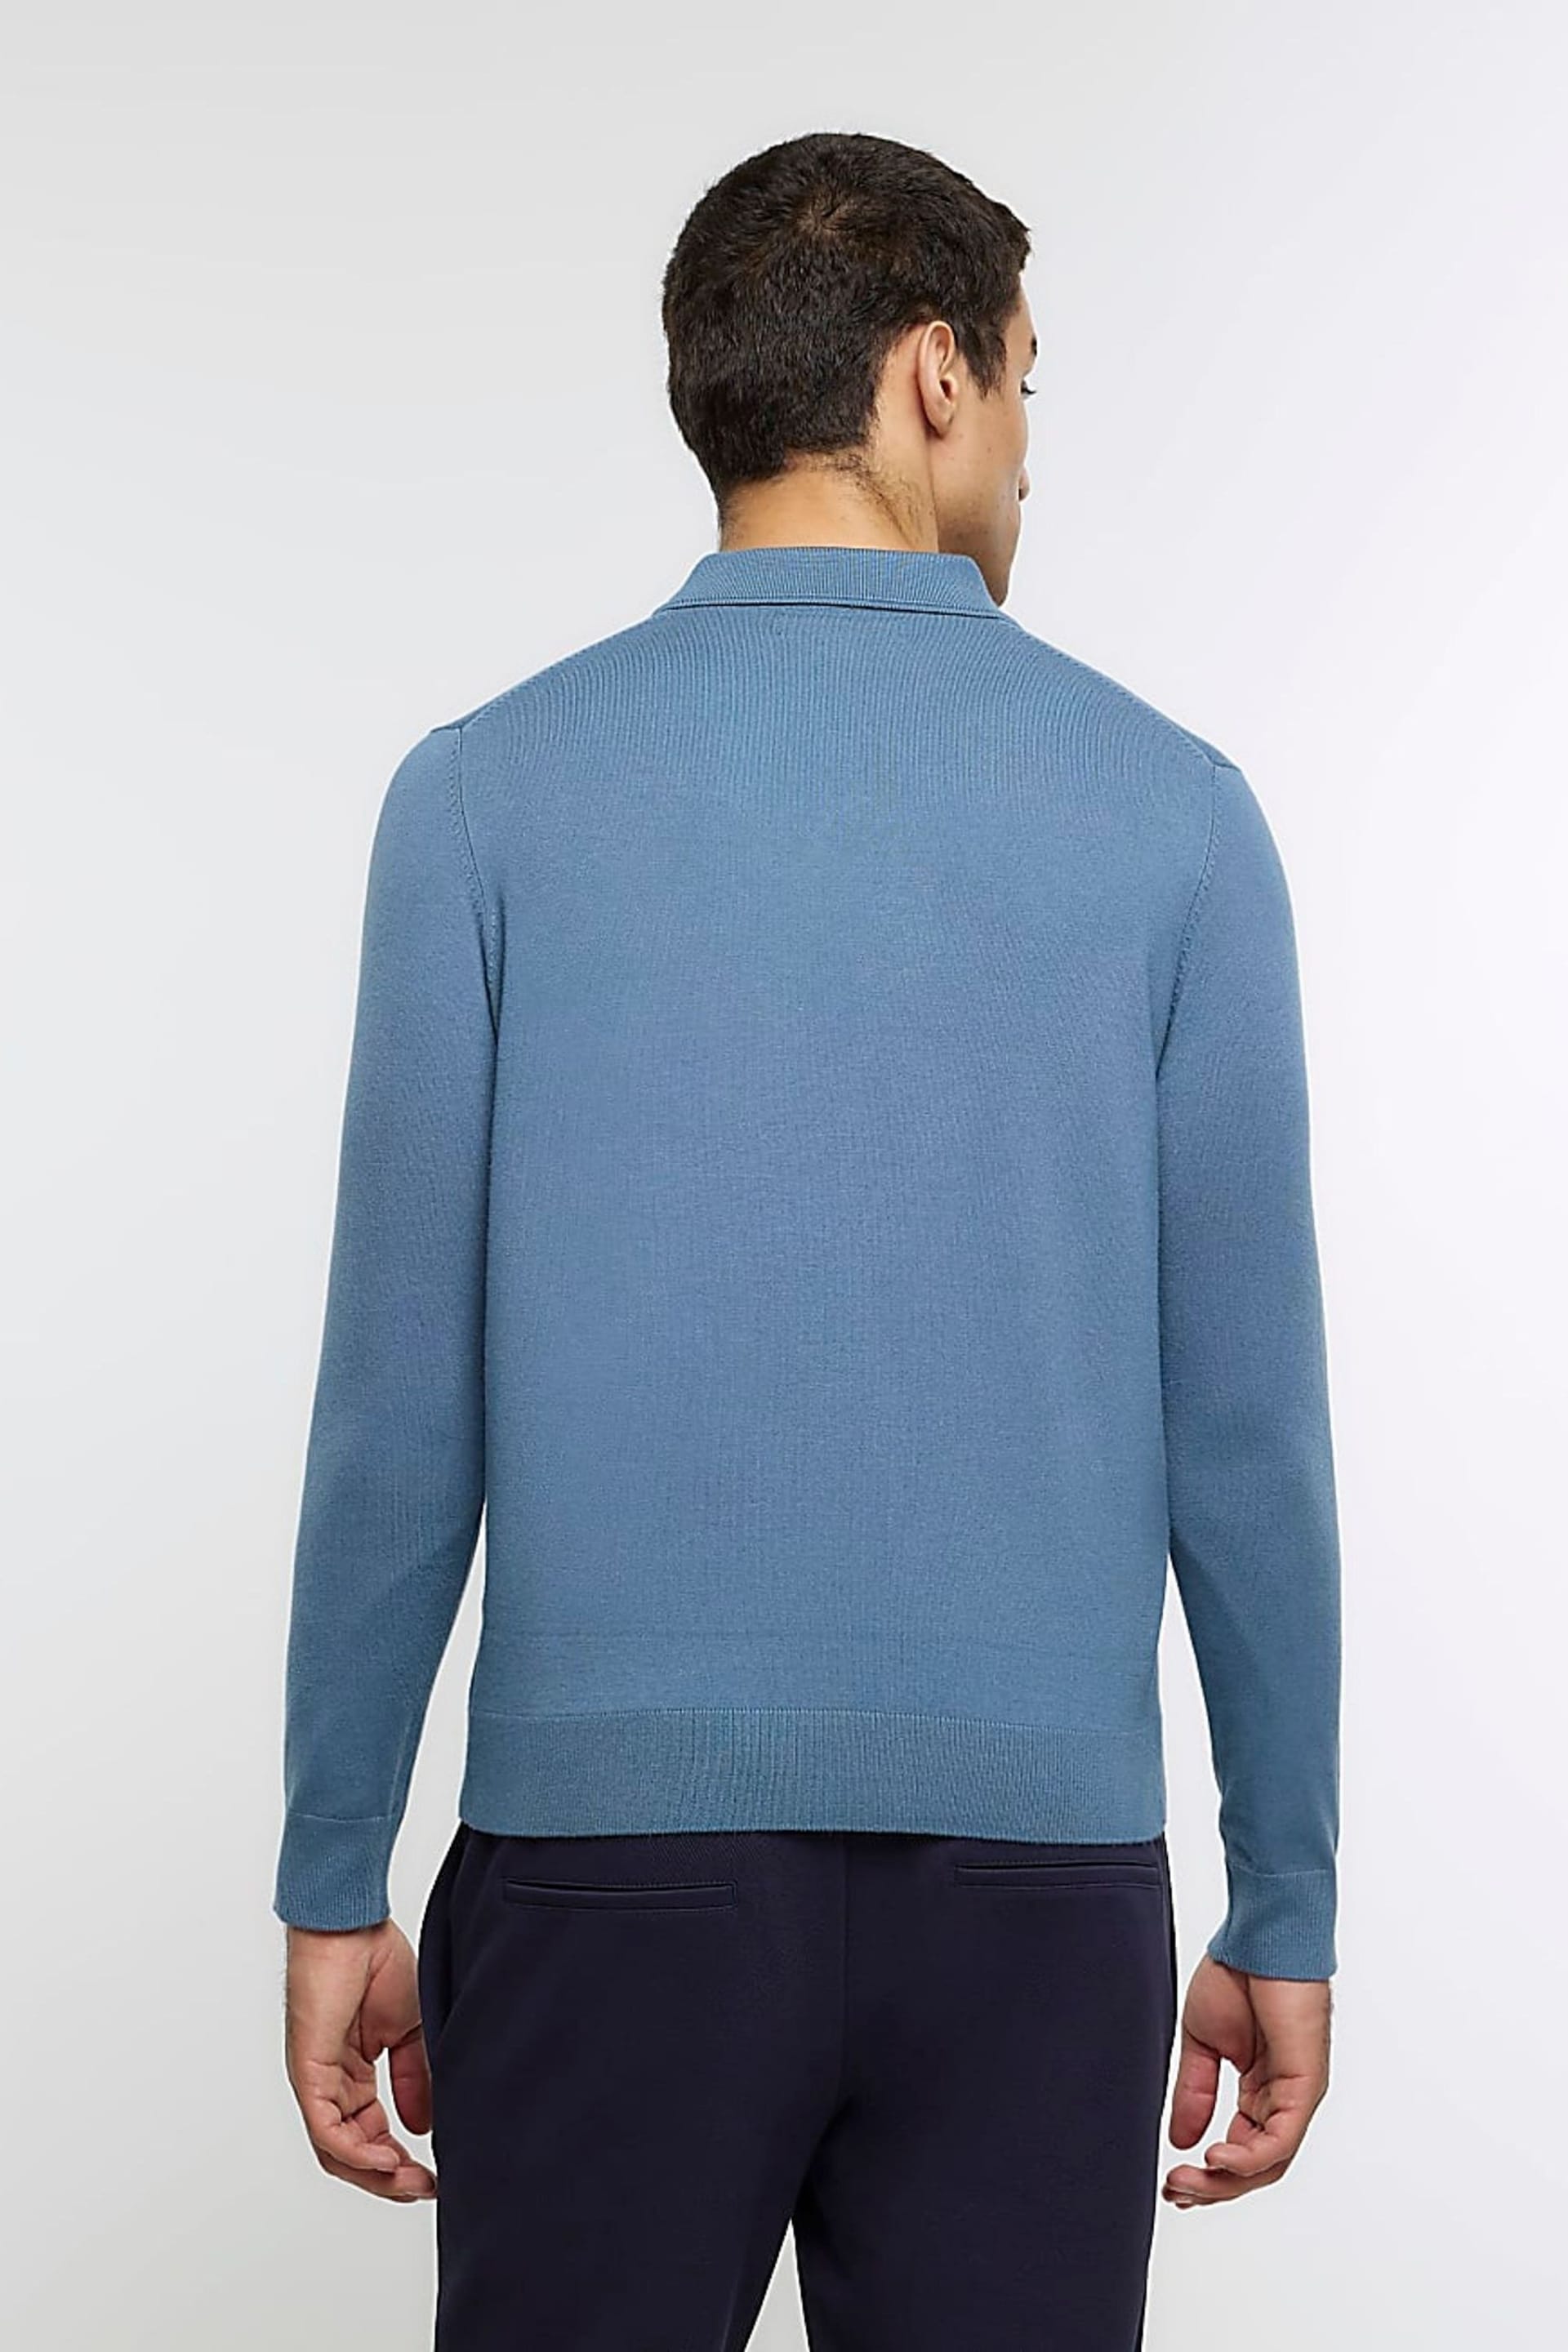 River Island Blue Knitted Polo Jumper - Image 2 of 4